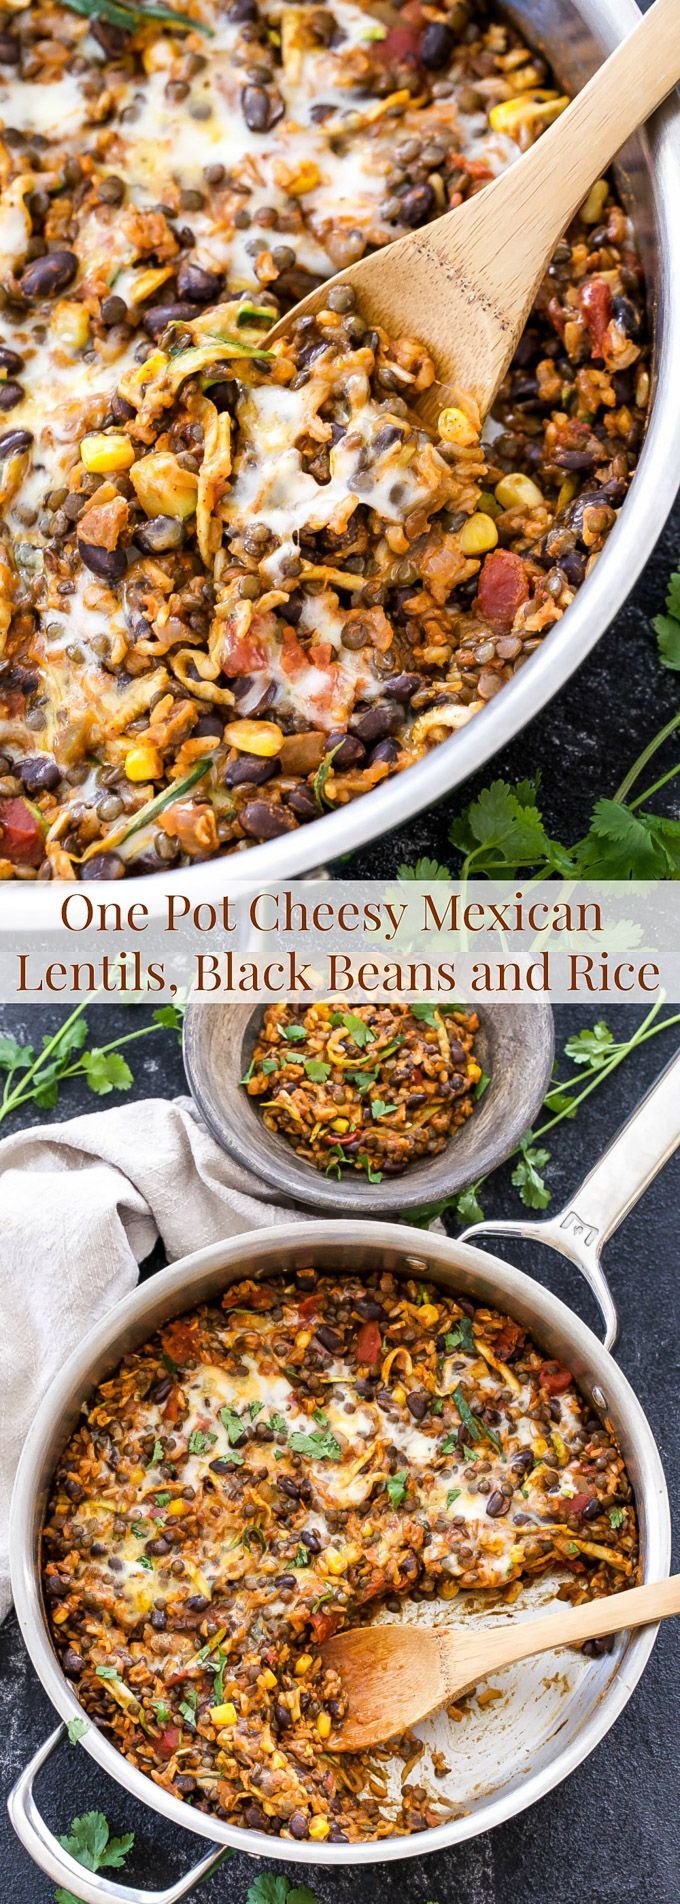 A healthy, vegetarian, gluten free dinner the whole family will love! You wont miss the meat in this easy to make, One Pot Cheesy